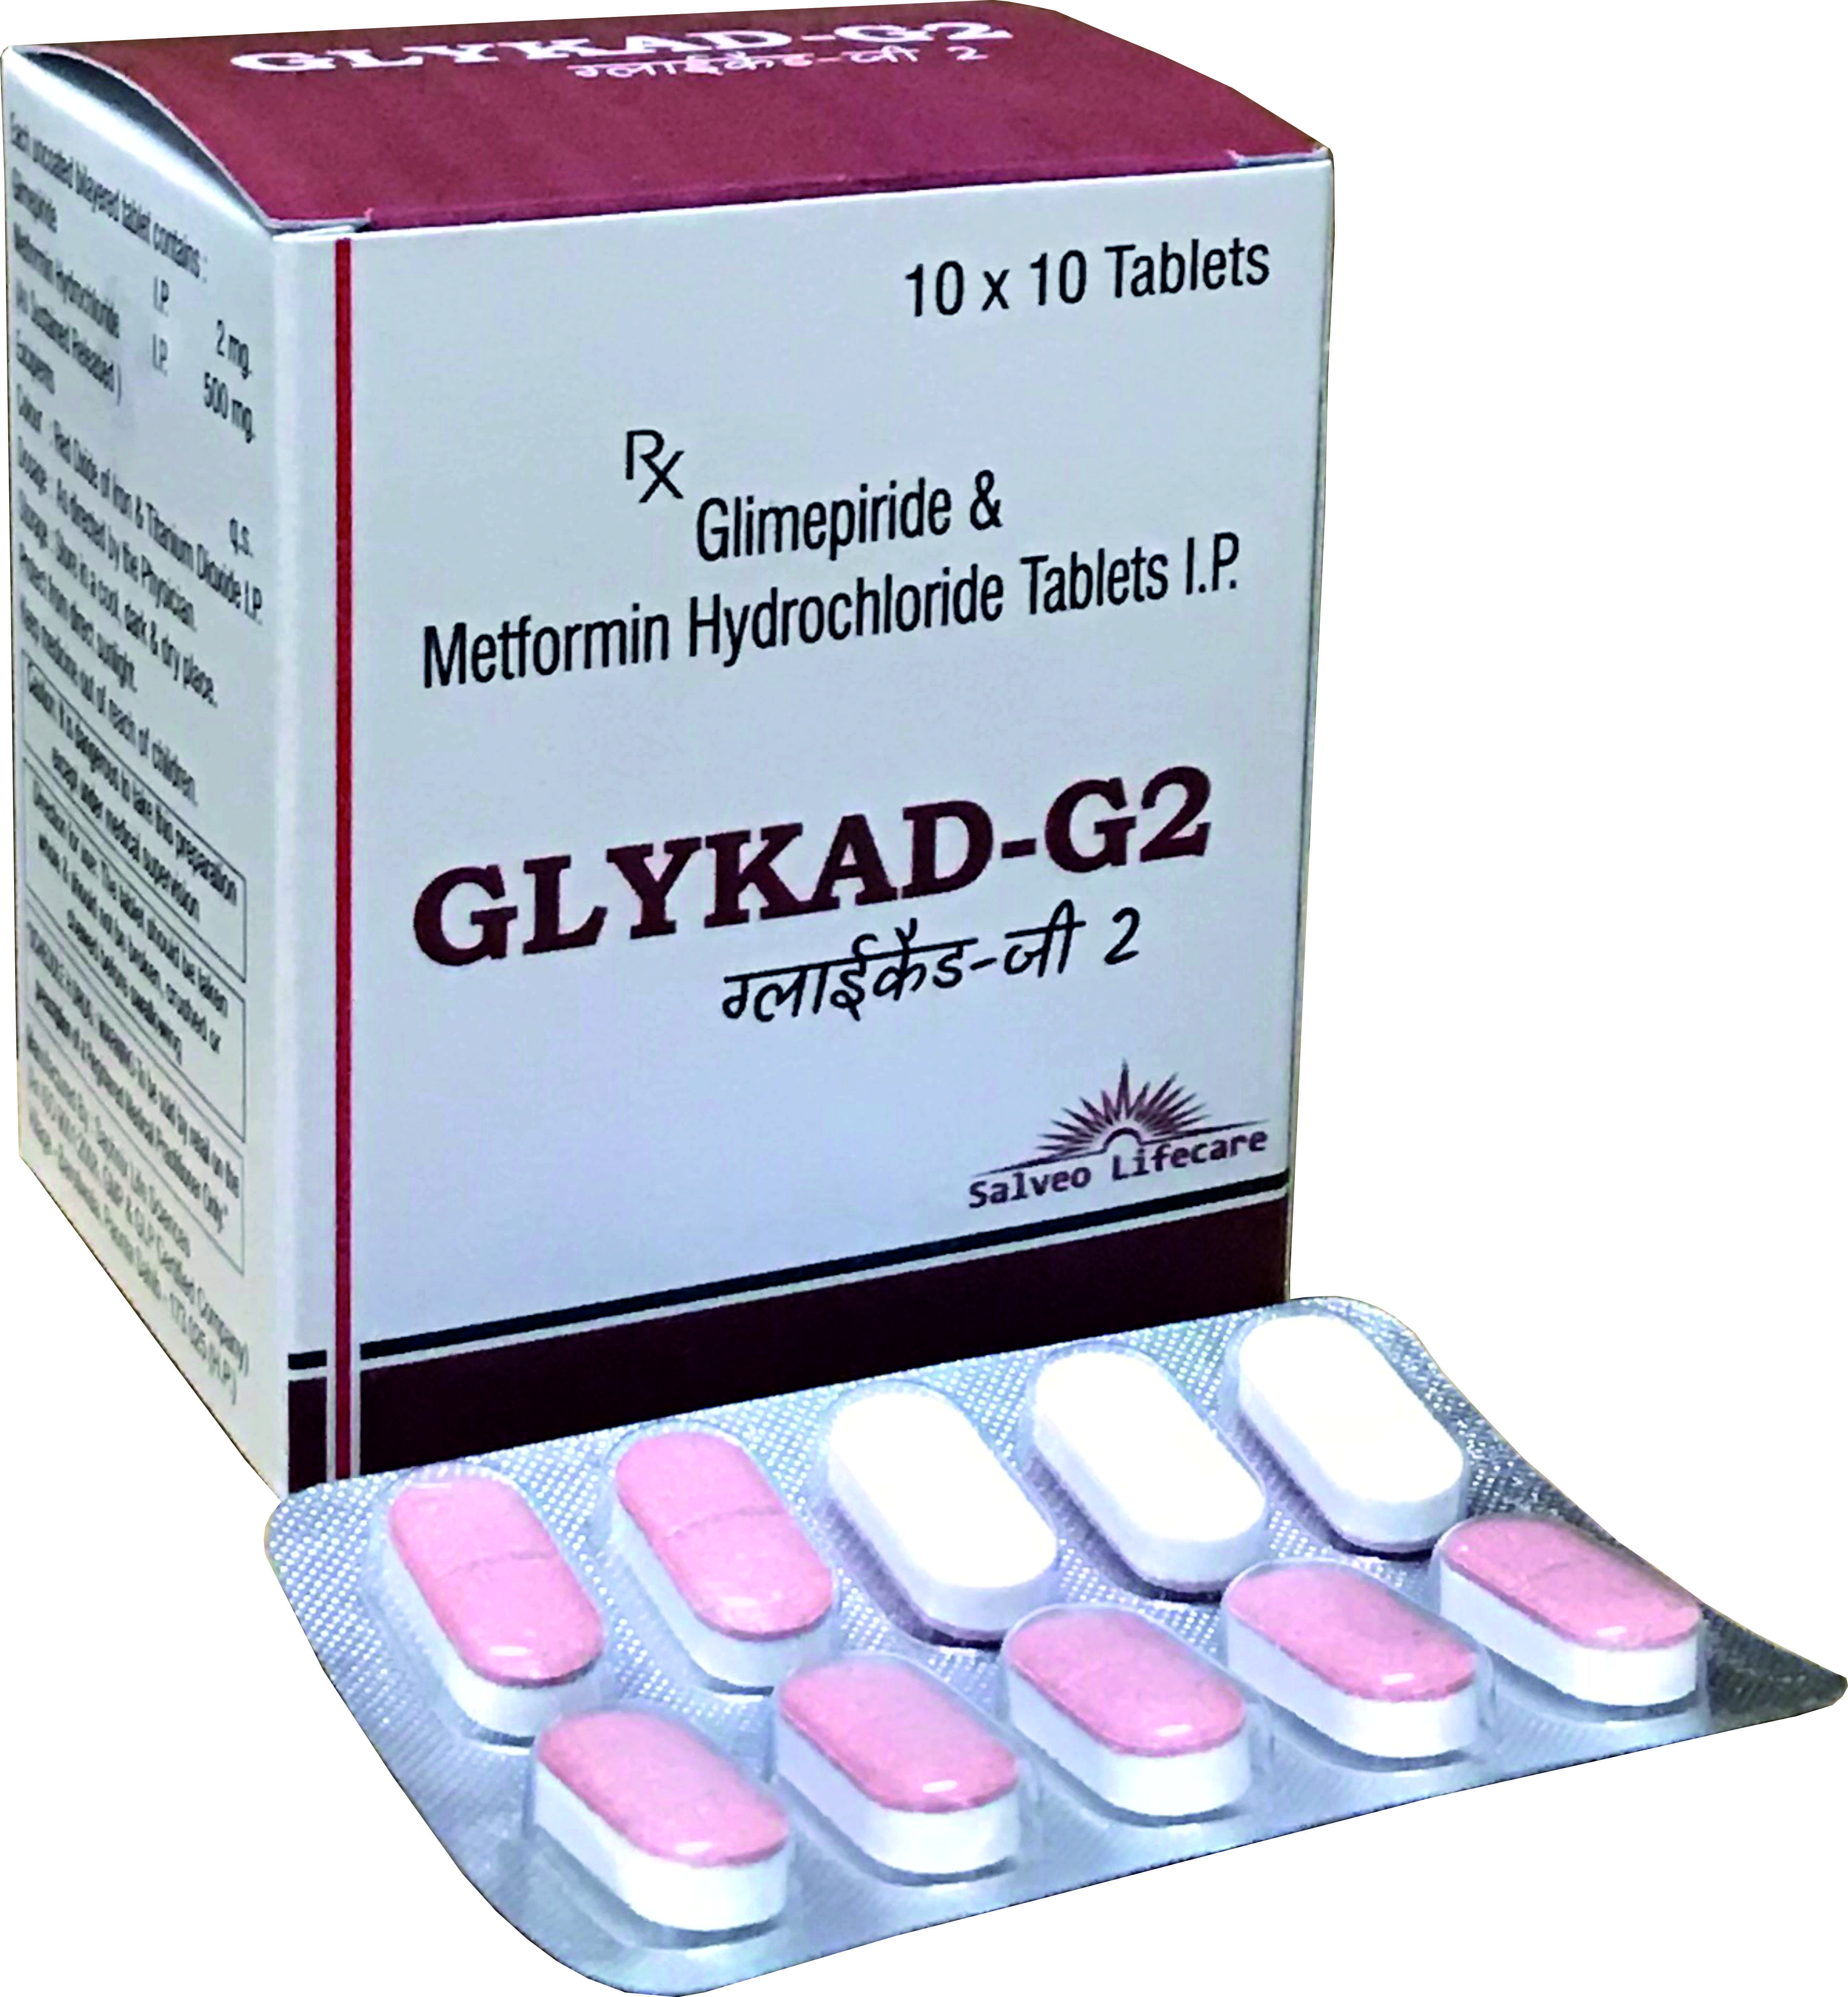 each bilayered tablet containes: metformin 500 mg sustained release; glimipride 2 mg